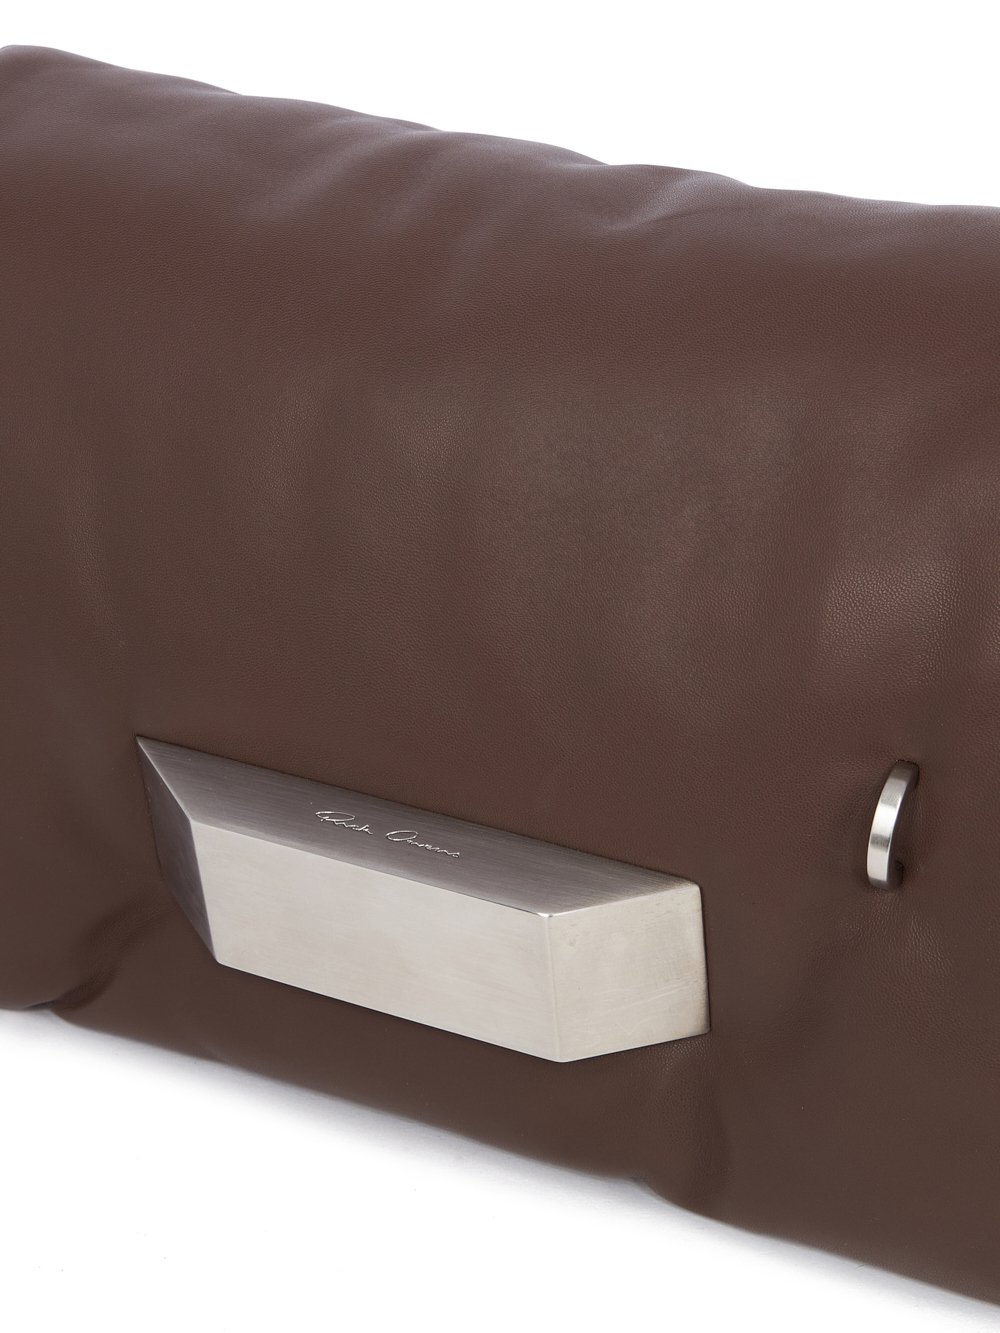 RICK OWENS FW23 LUXOR BIG PILLOW GRIFFIN IN BROWN PEACHED LAMBSKIN